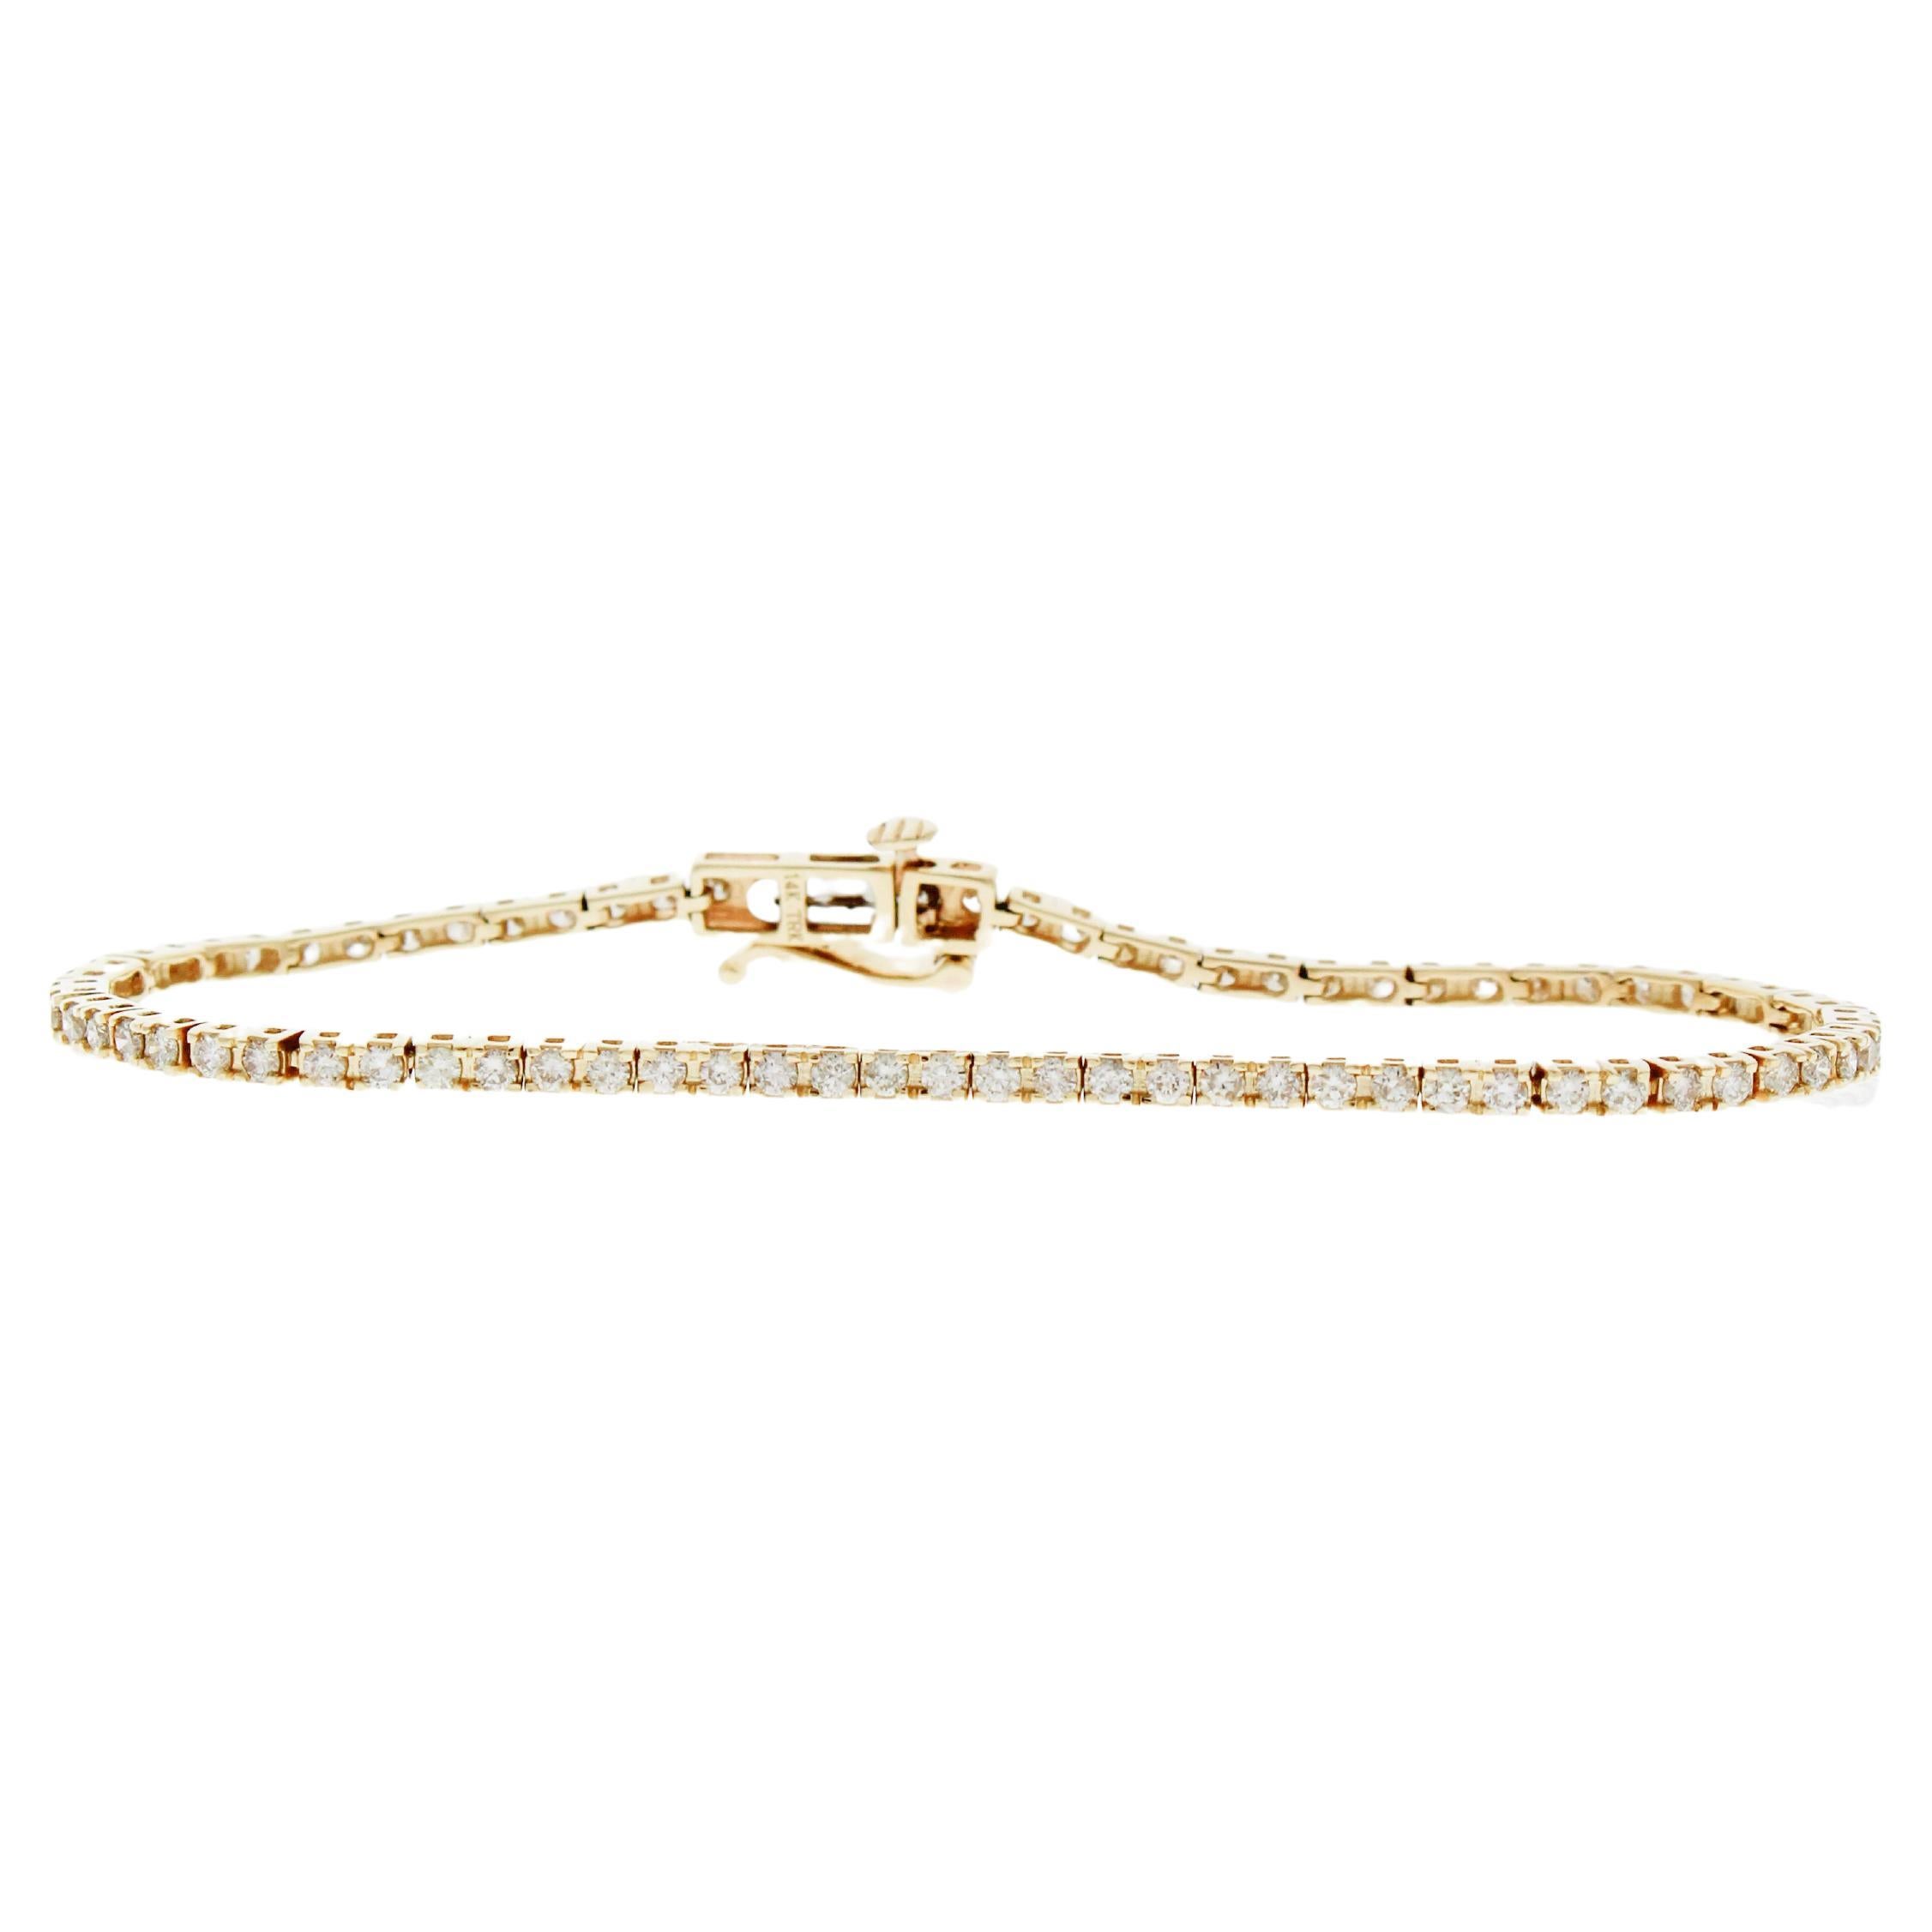 This is a versatile 5 carat, 4-prong set diamond tennis bracelet. The round brilliants are I color and SI in clarity. There are 55 round brilliant cuts in this piece. You don't have to be a tennis champ to enjoy this jewelry staple. They are a